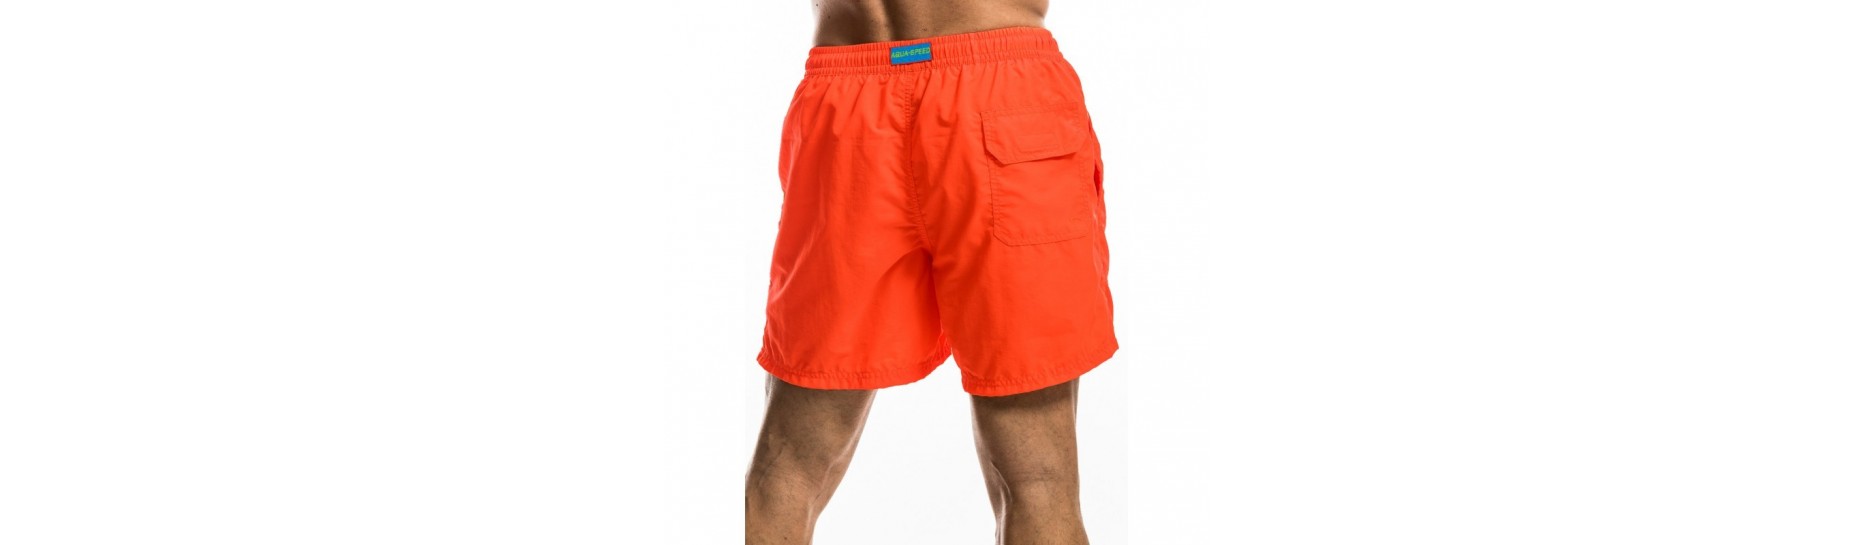 Clothing for lifeguards and rescuers